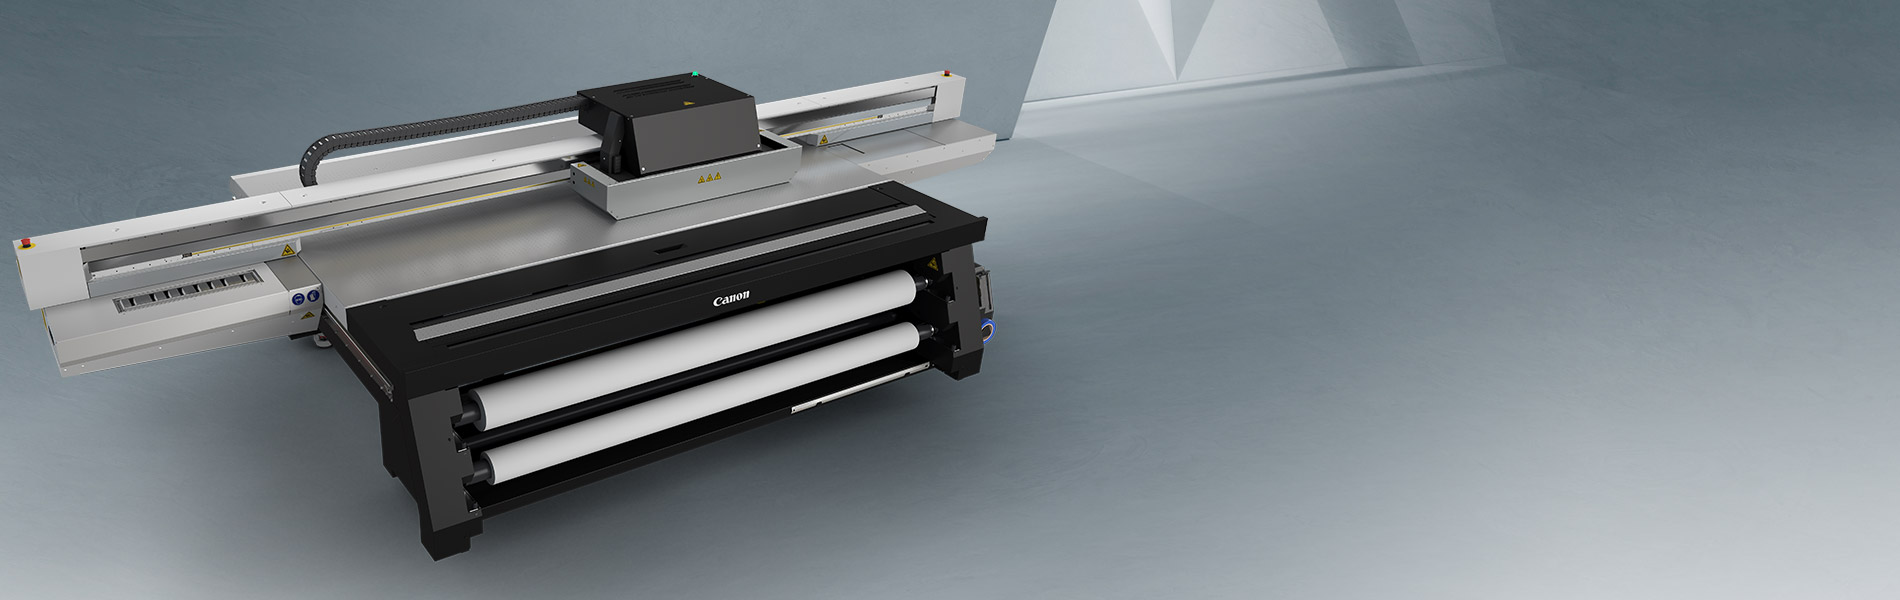 Enterprise, Production & Large Format Printing Systems from Canon ...